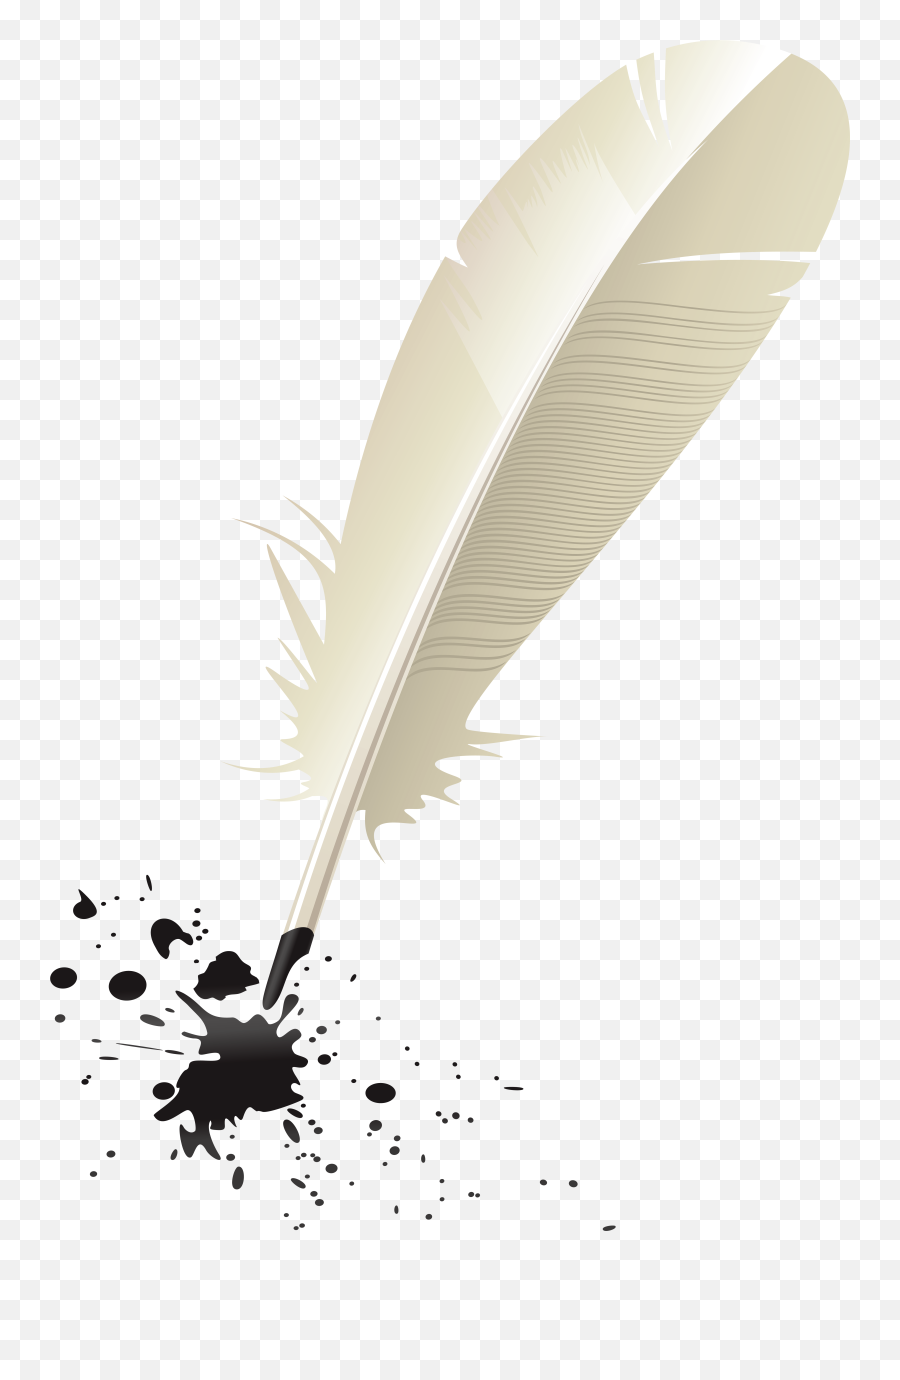 Transparent Background Quill And Ink - Transparent Background Quill And Ink Clipart Emoji,Quill Emoji